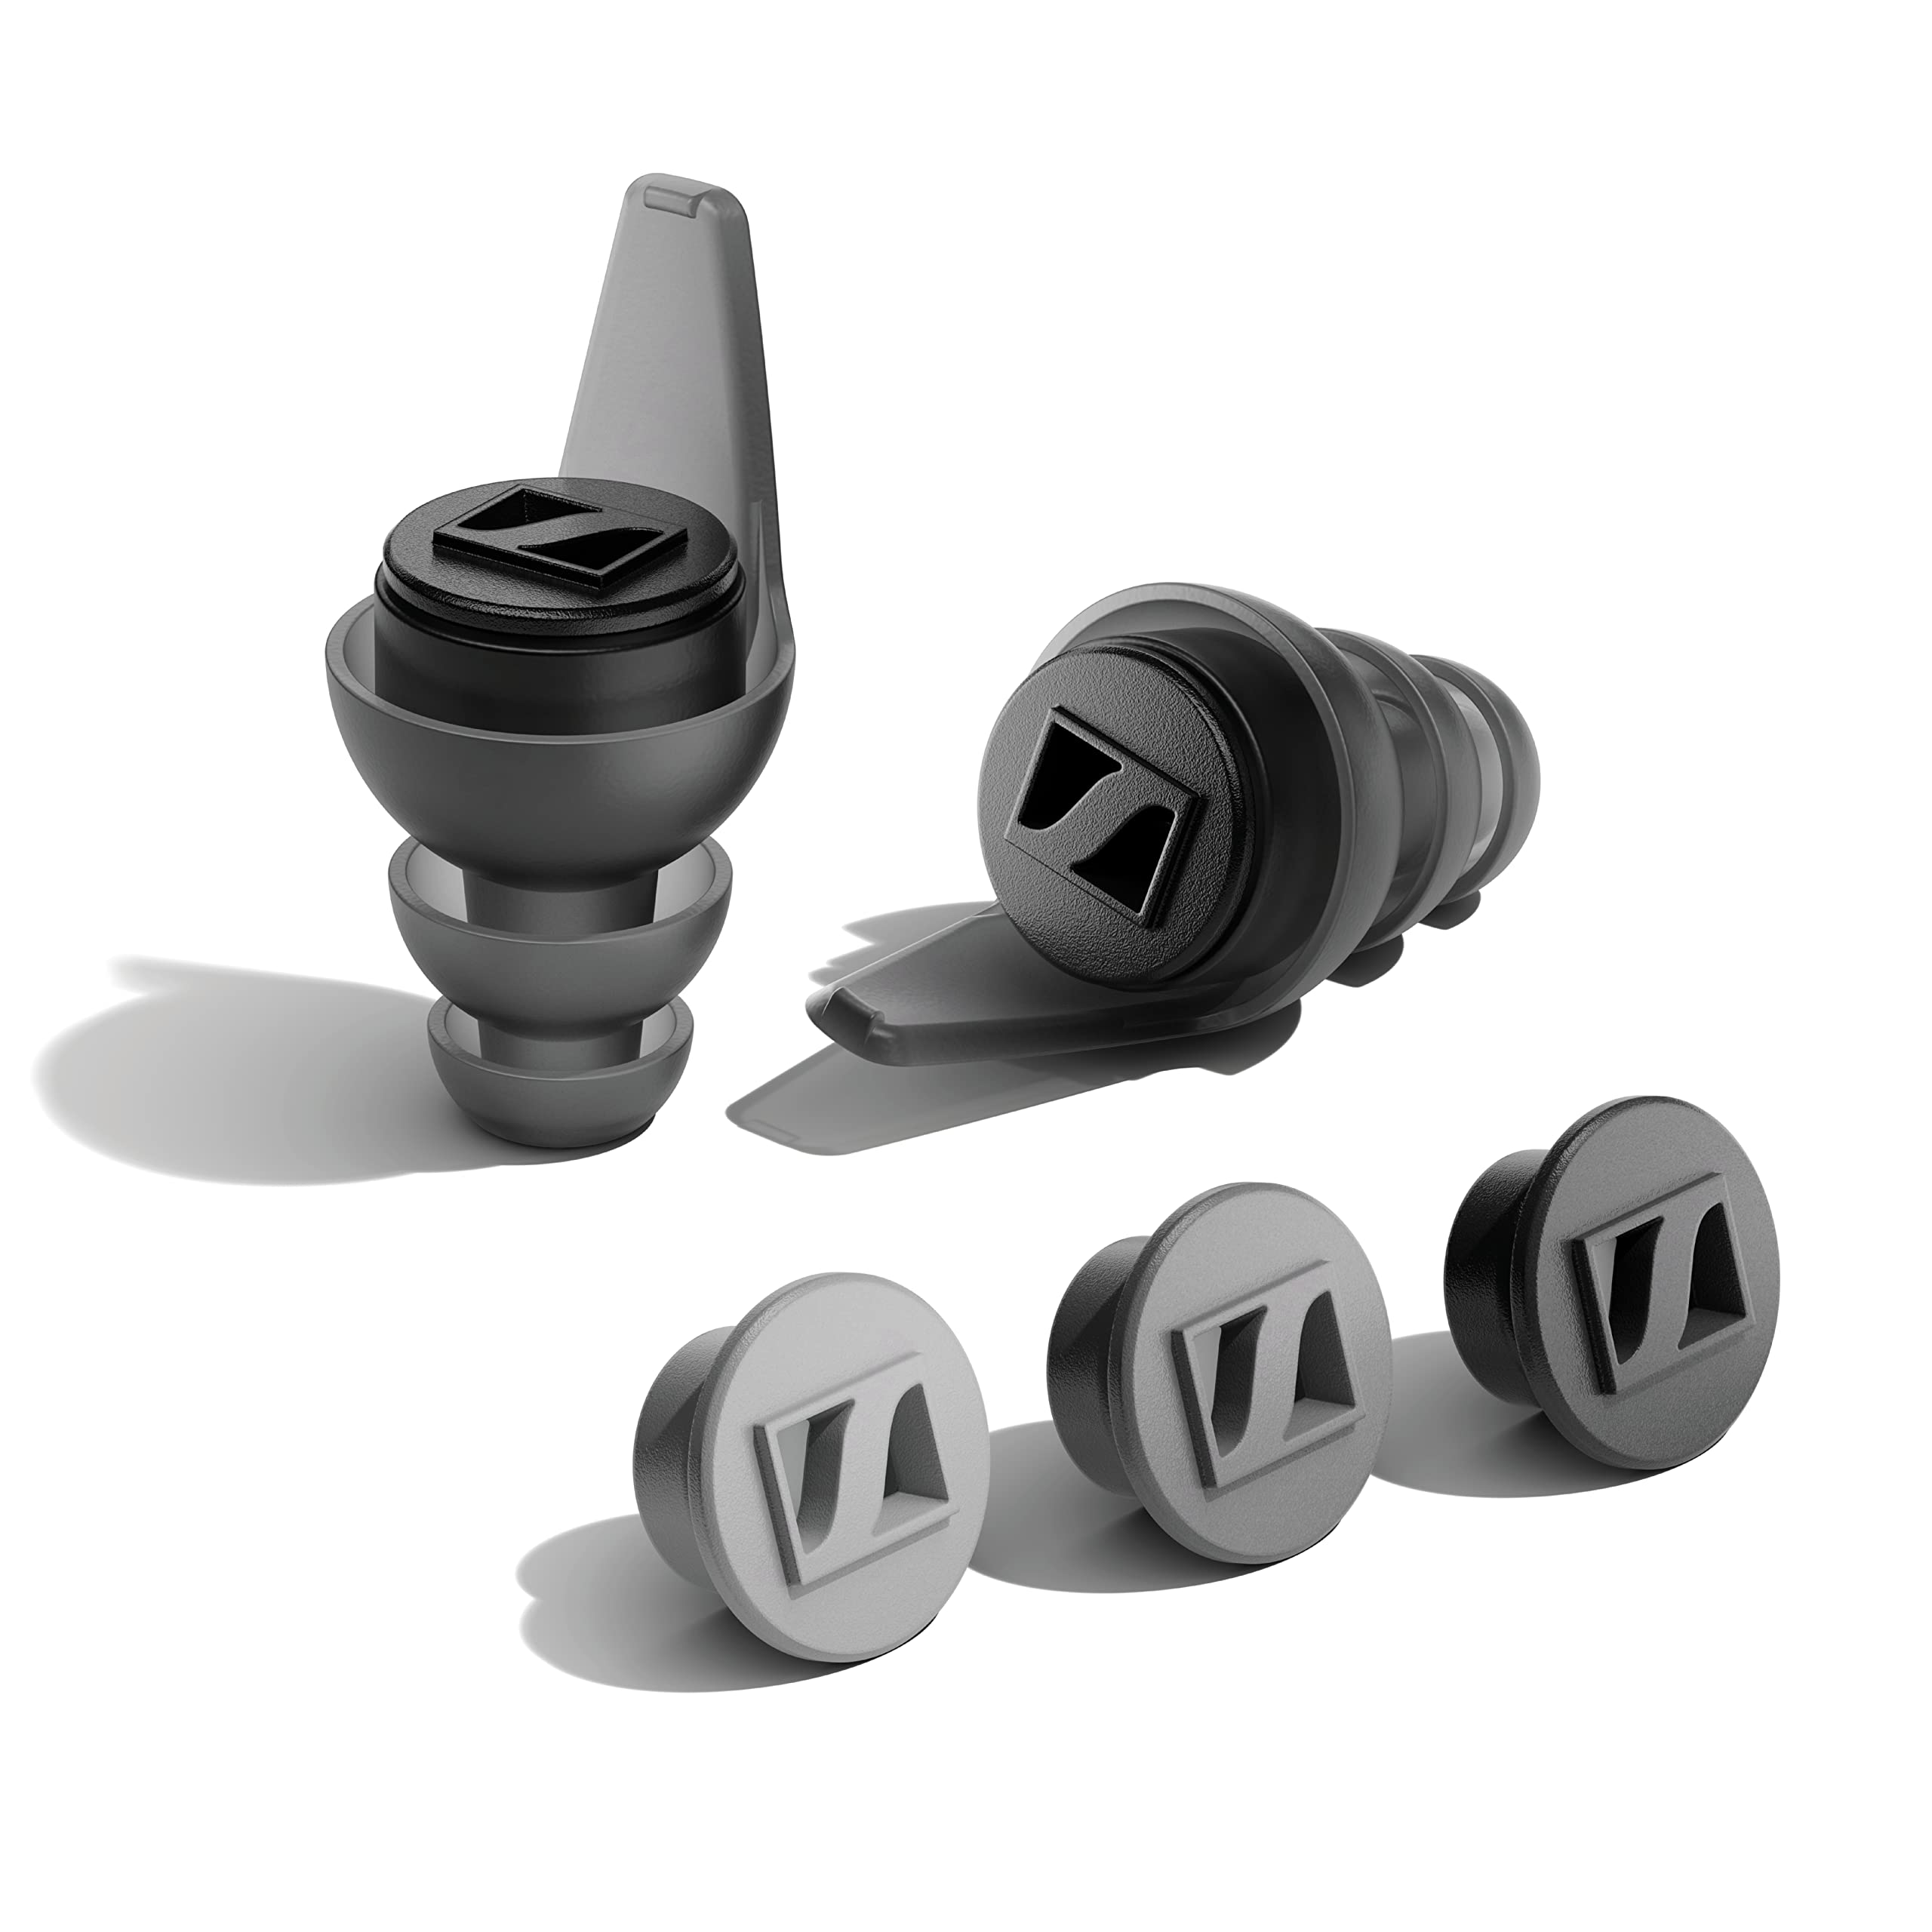 Sennheiser SoundProtex Plus Earplugs - Reusable Hearing Protection with 4 Interchangeable Filters - High Fidelity Sound at a Safe Volume Level - Black,Grey